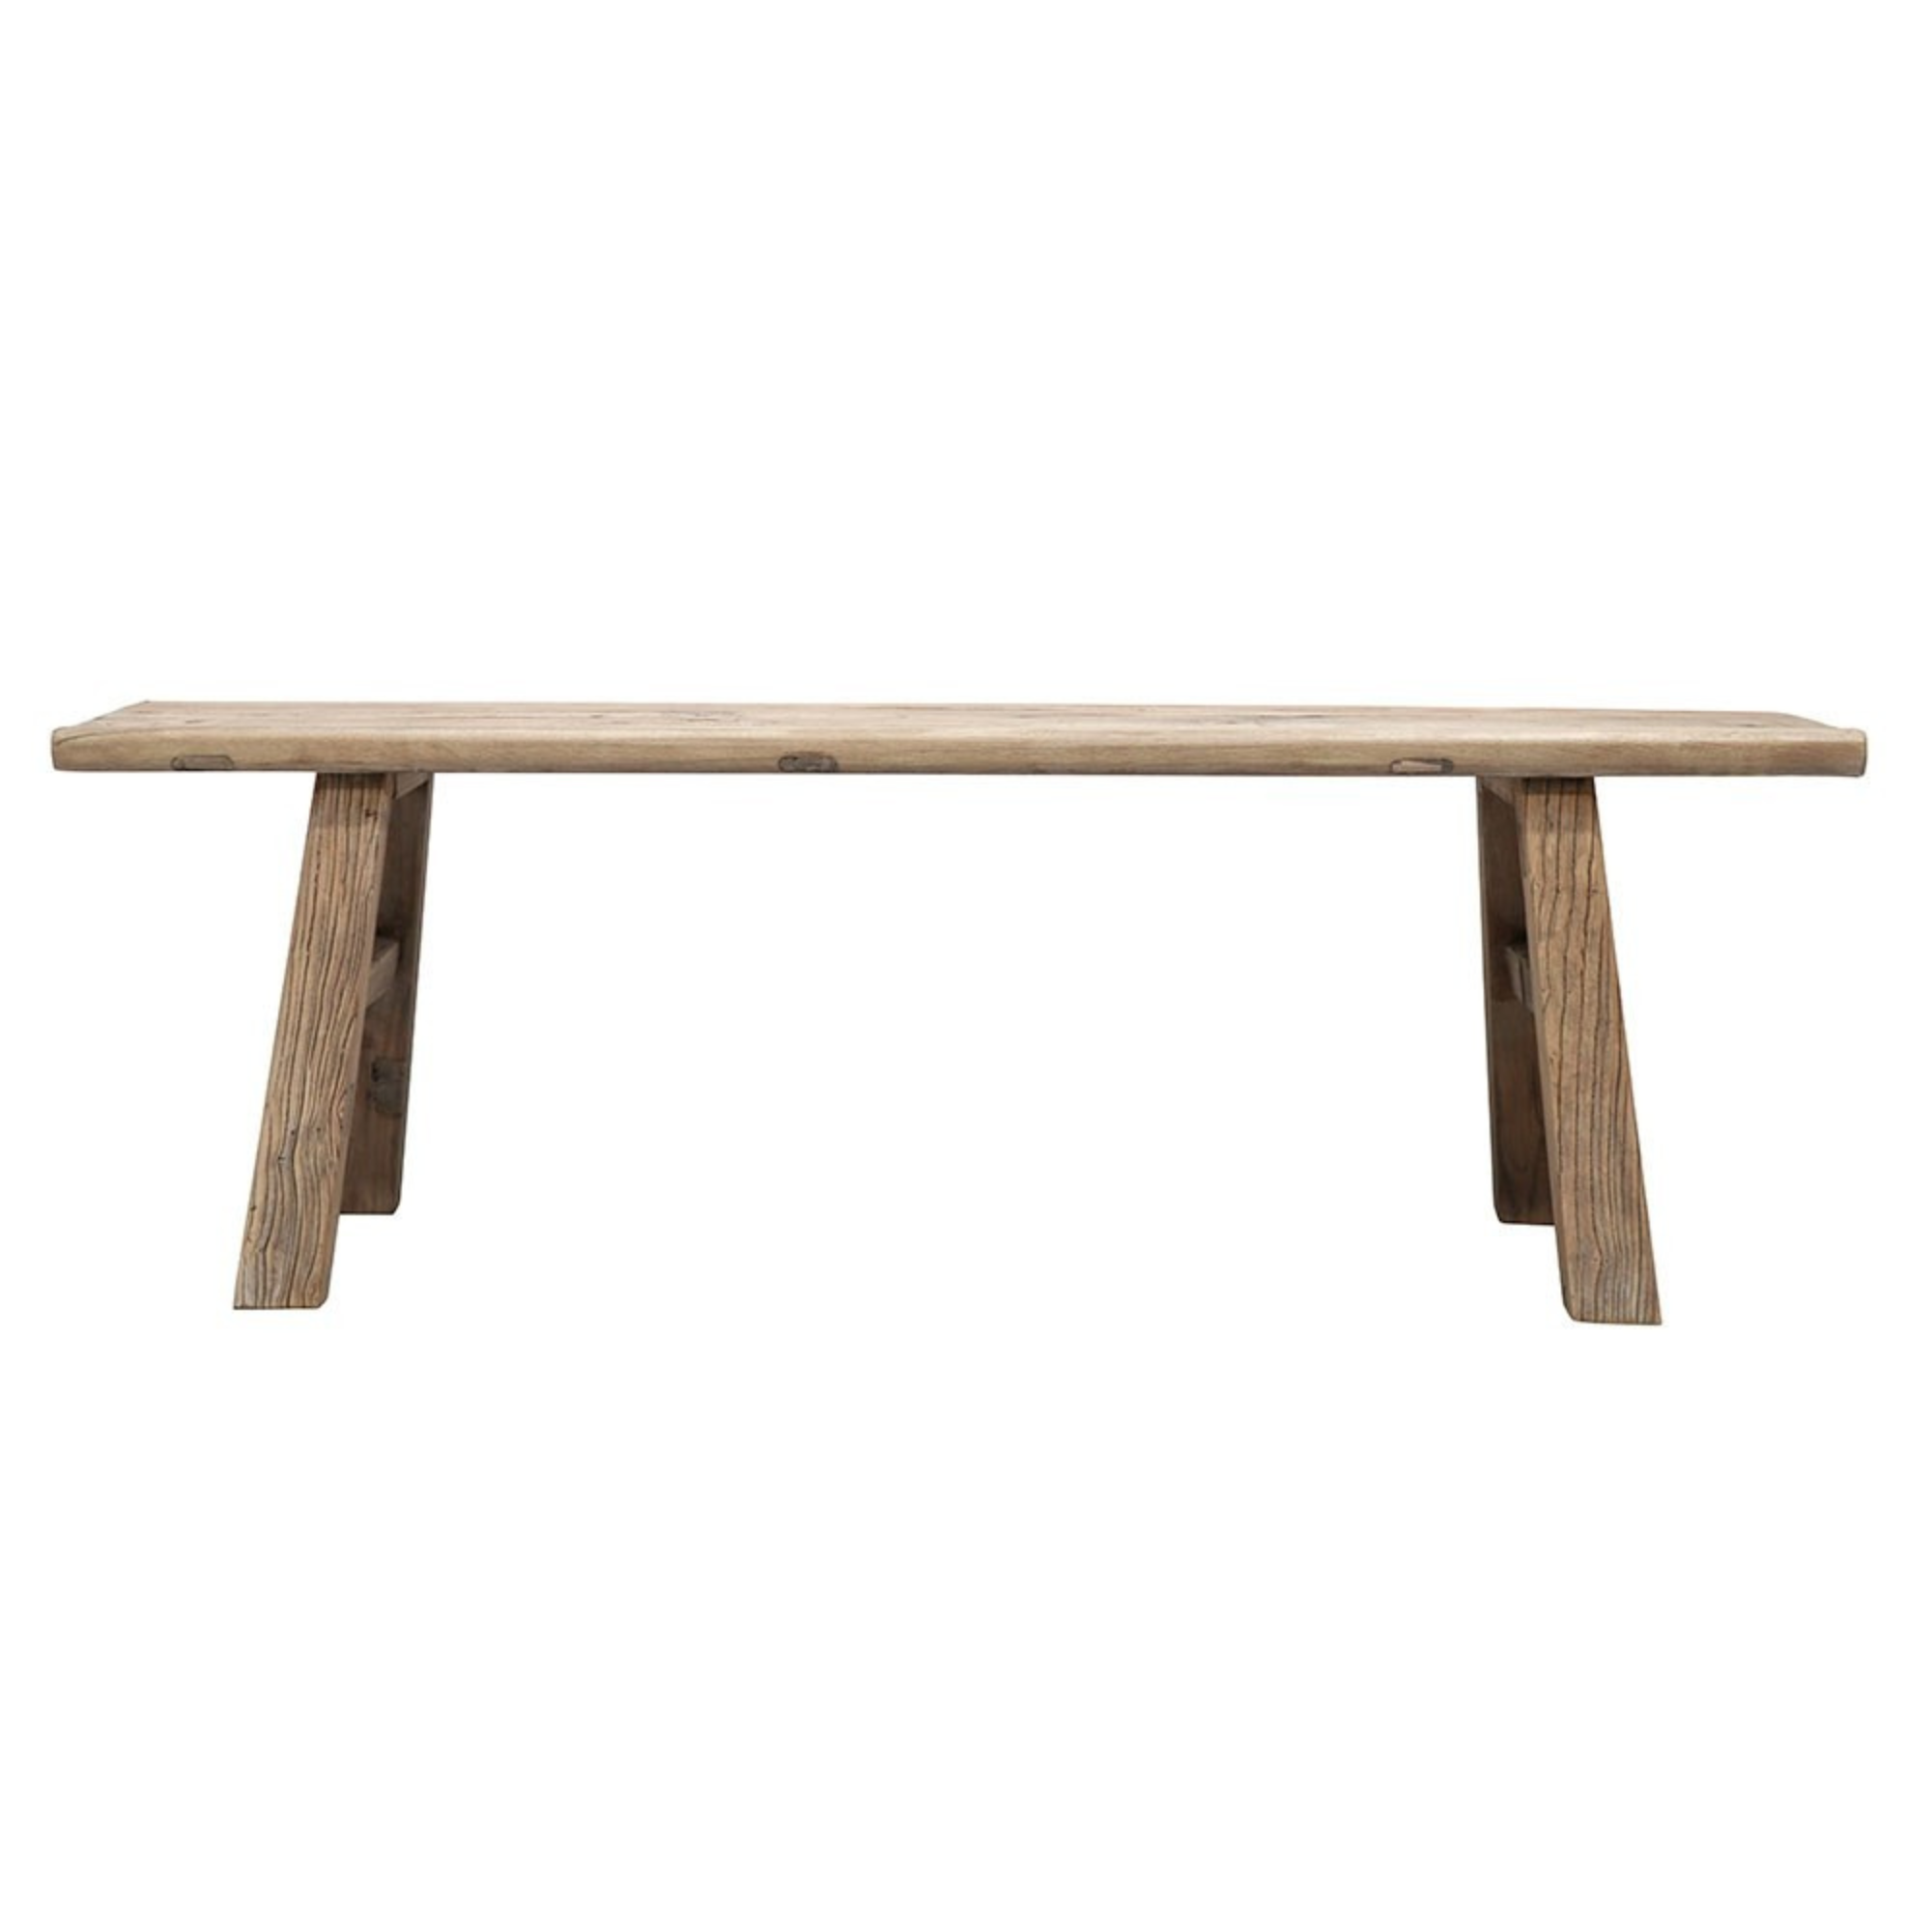 PARQ BENCH SEAT | 3 SIZES | NATURAL OR BLACK